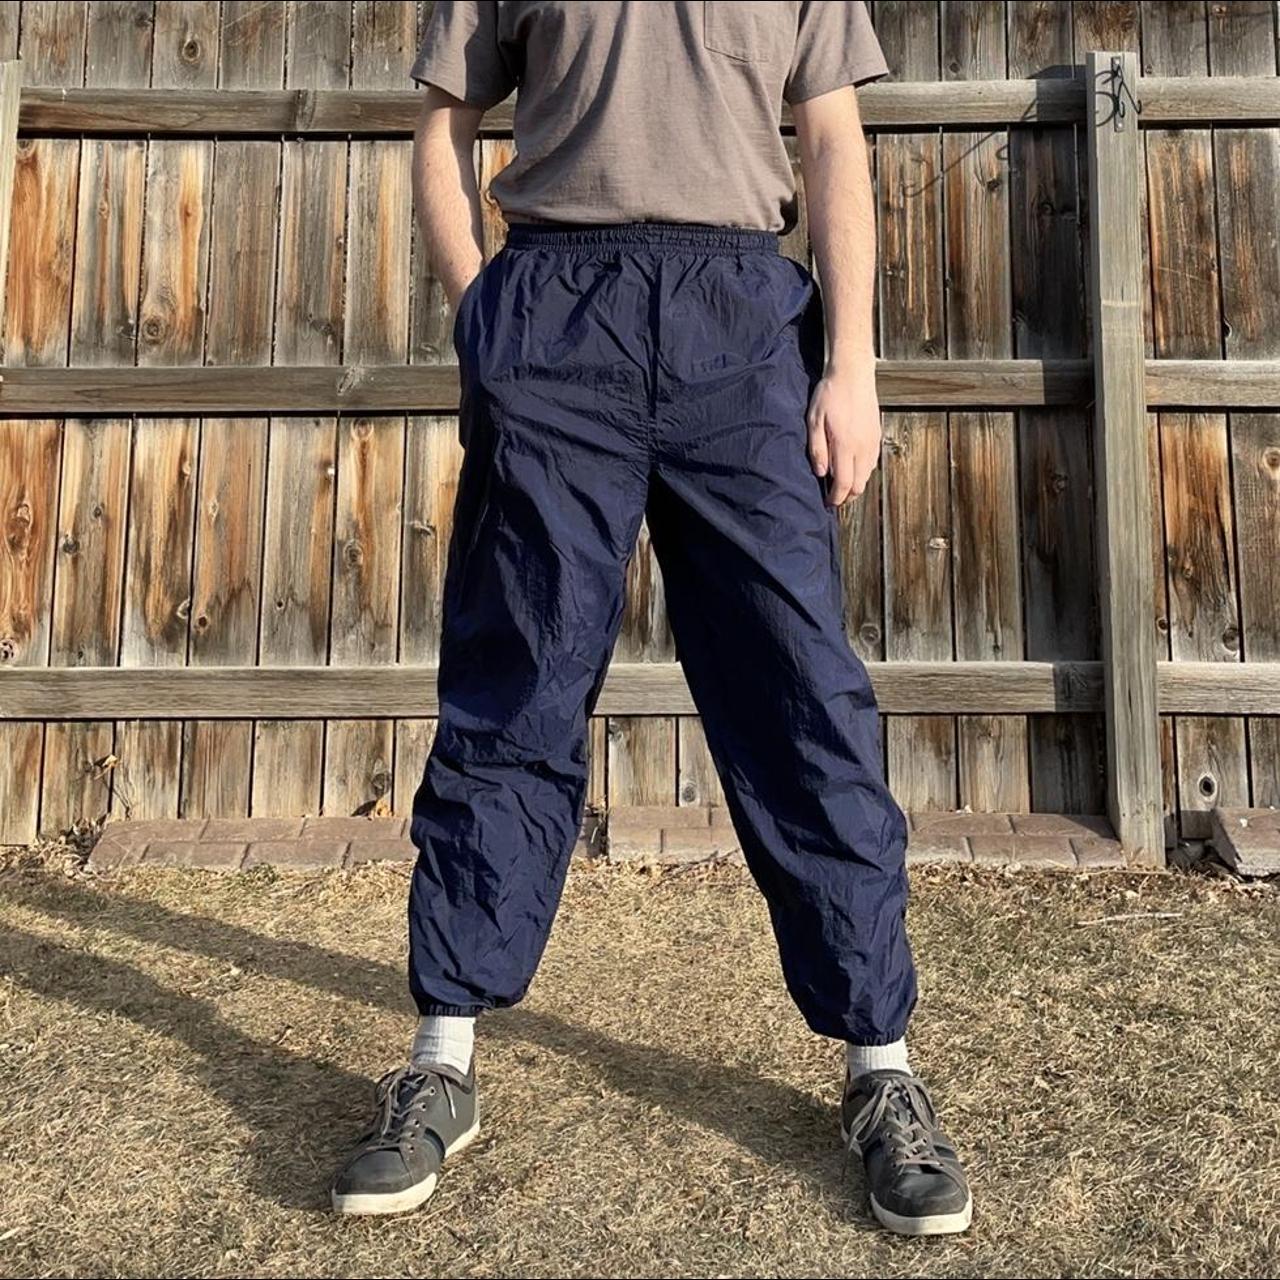 Vintage 90s navy blue lined nylon track pants. Great...